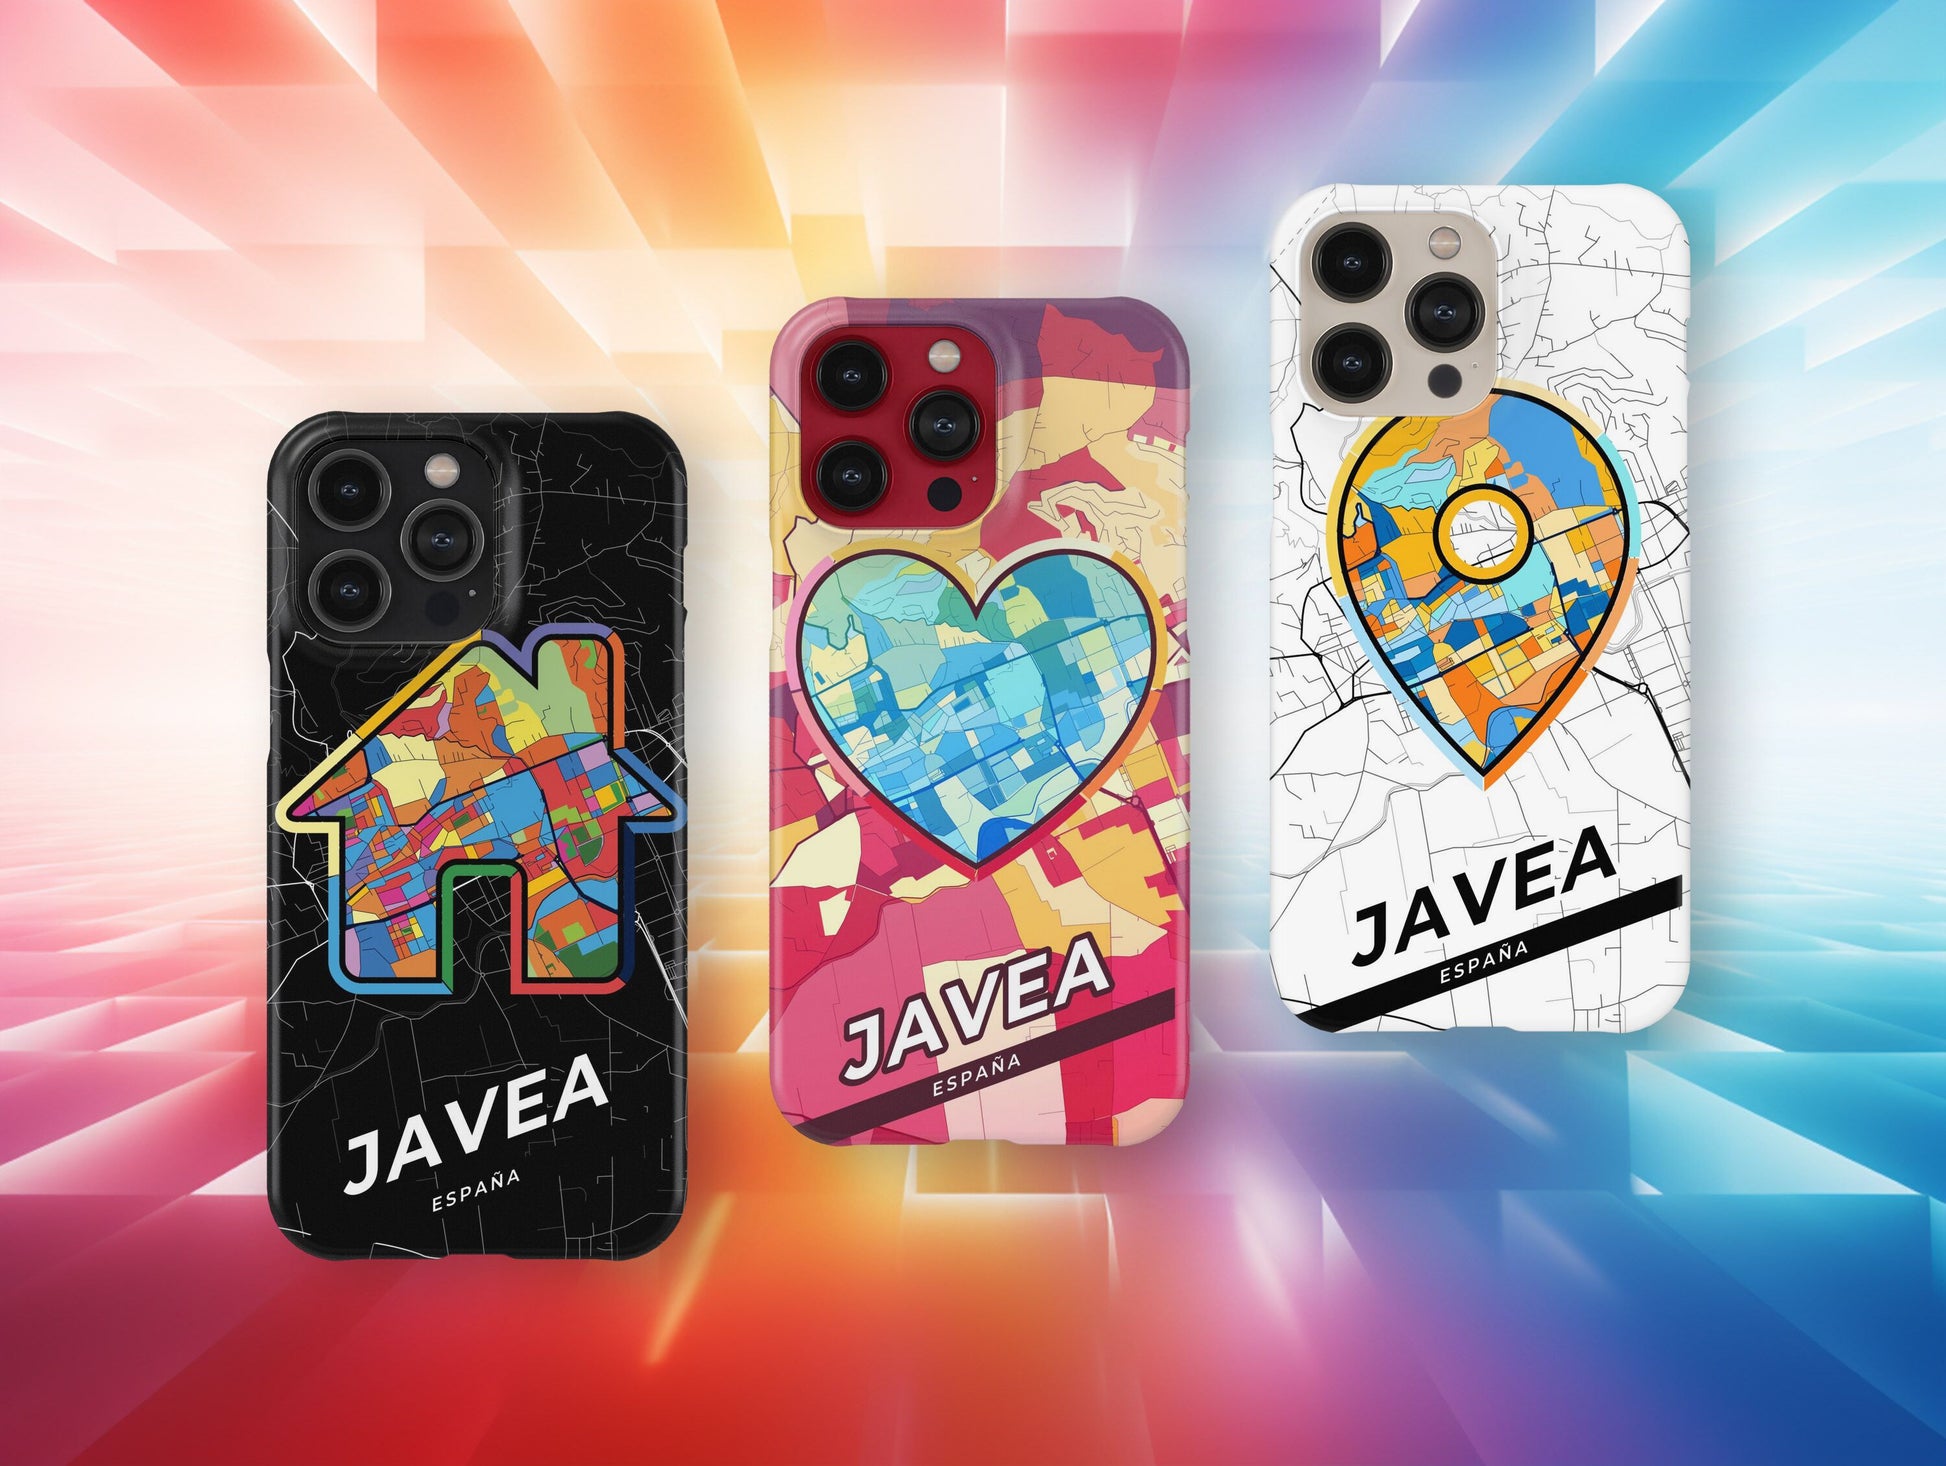 Javea Spain slim phone case with colorful icon. Birthday, wedding or housewarming gift. Couple match cases.